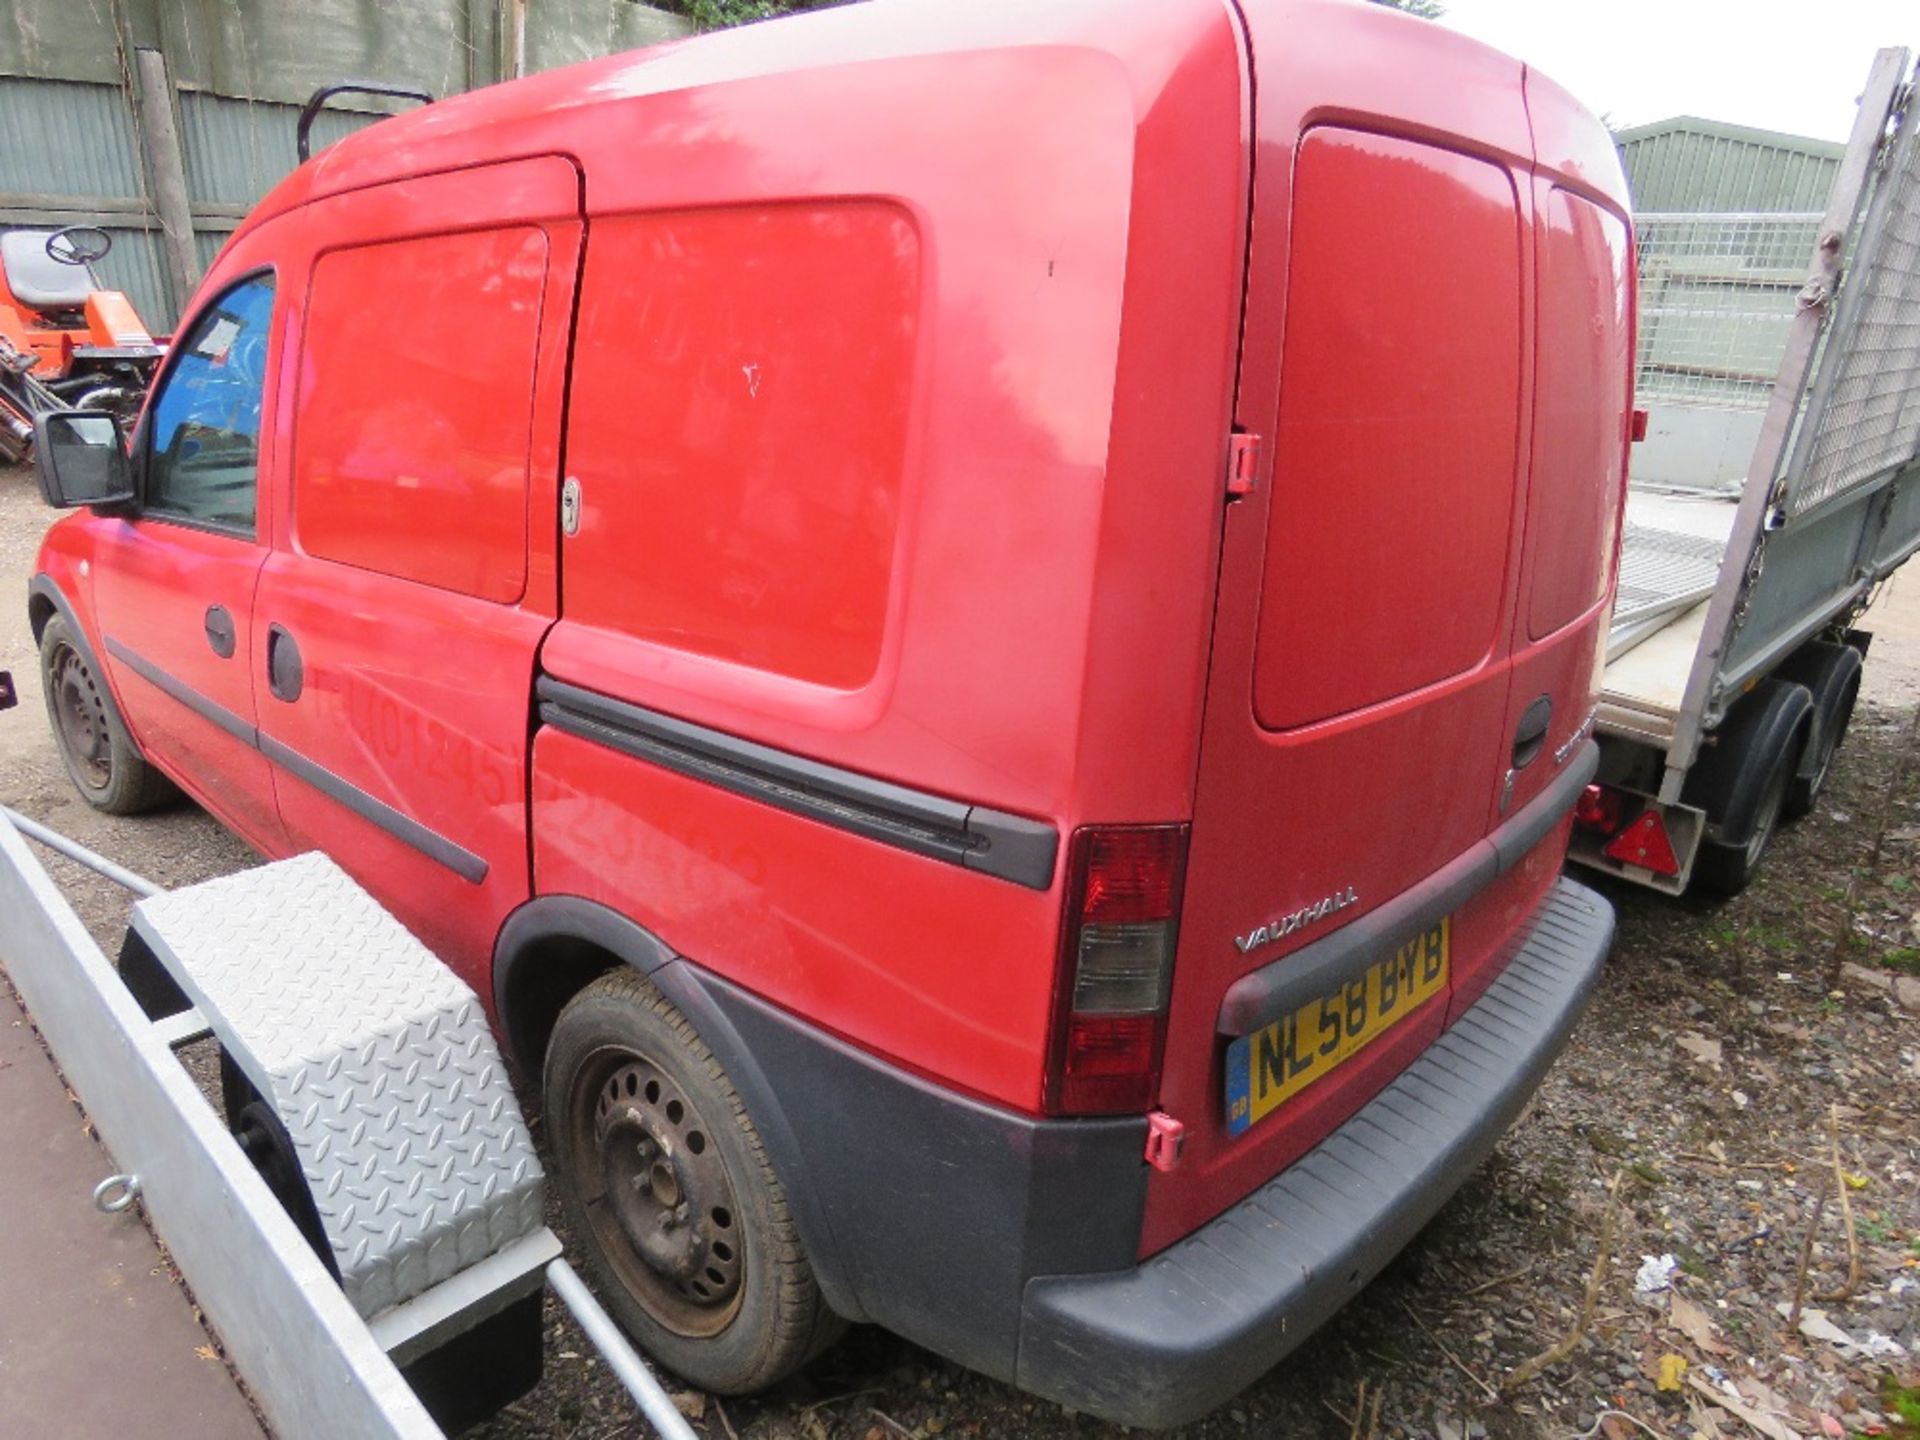 VAUXHALL COMBO PANEL VAN REG:NL58 BYB. MILES NOT SHOWING. TEST EXPIRED. SIDE DOOR. WHEN TESTED WAS S - Image 3 of 9